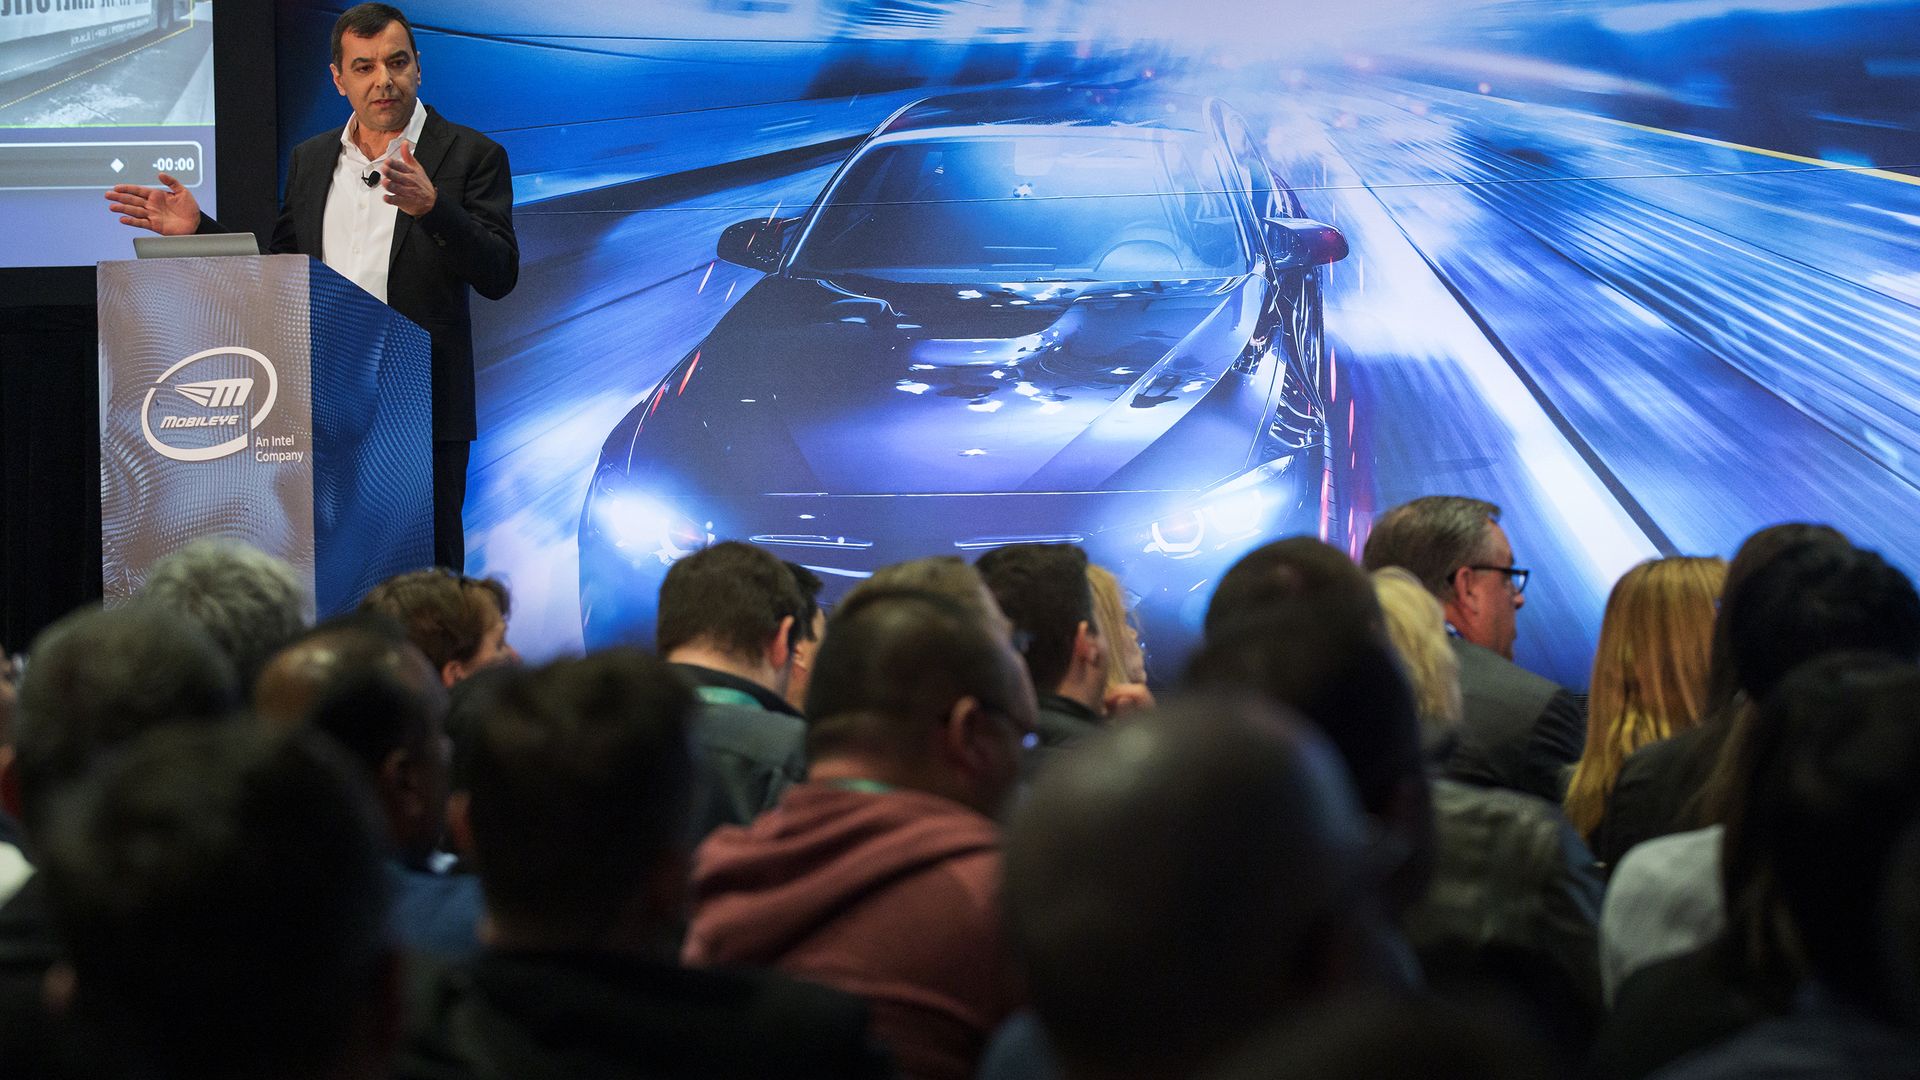 Image of Mobileye CEO Amnon Shashua speaking at CES